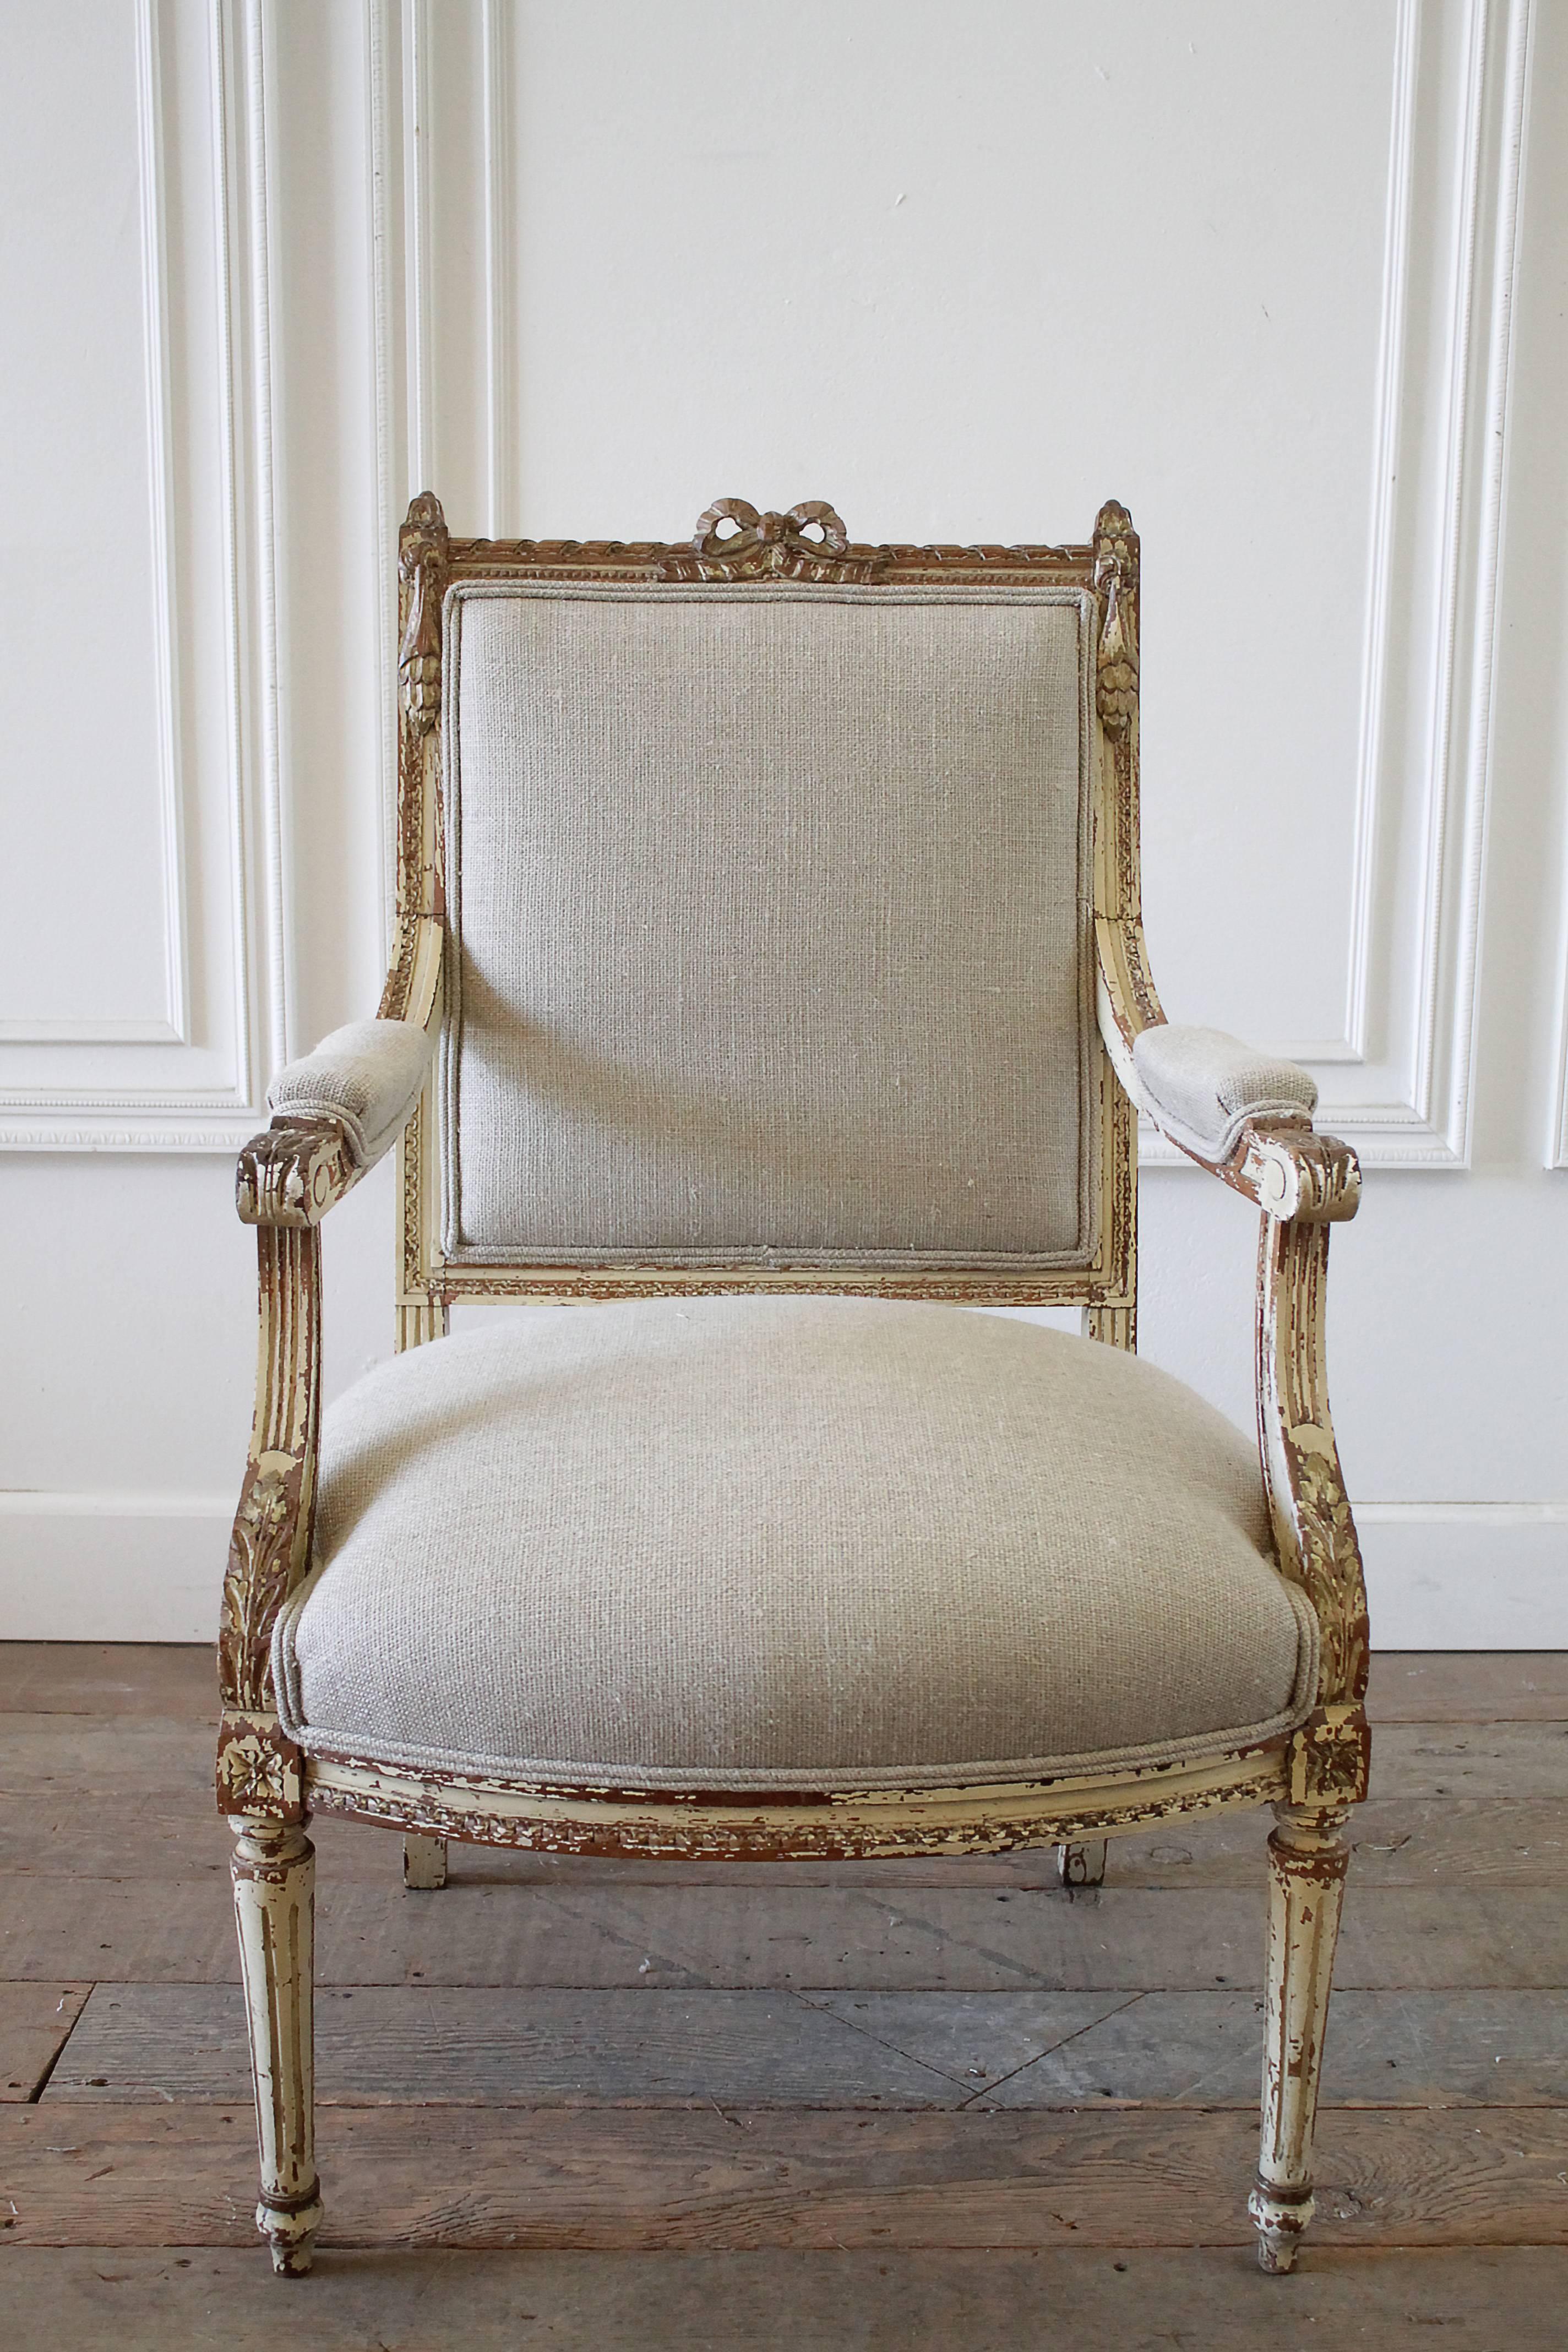 19th century carved Louis XVI style ribbon chair upholstered in Irish linen
Original paint finish, perfectly weathered showing the raw wood, paint is in creams and whites. I used a beautiful organic Irish Linen in a thick soft nubby burlap like